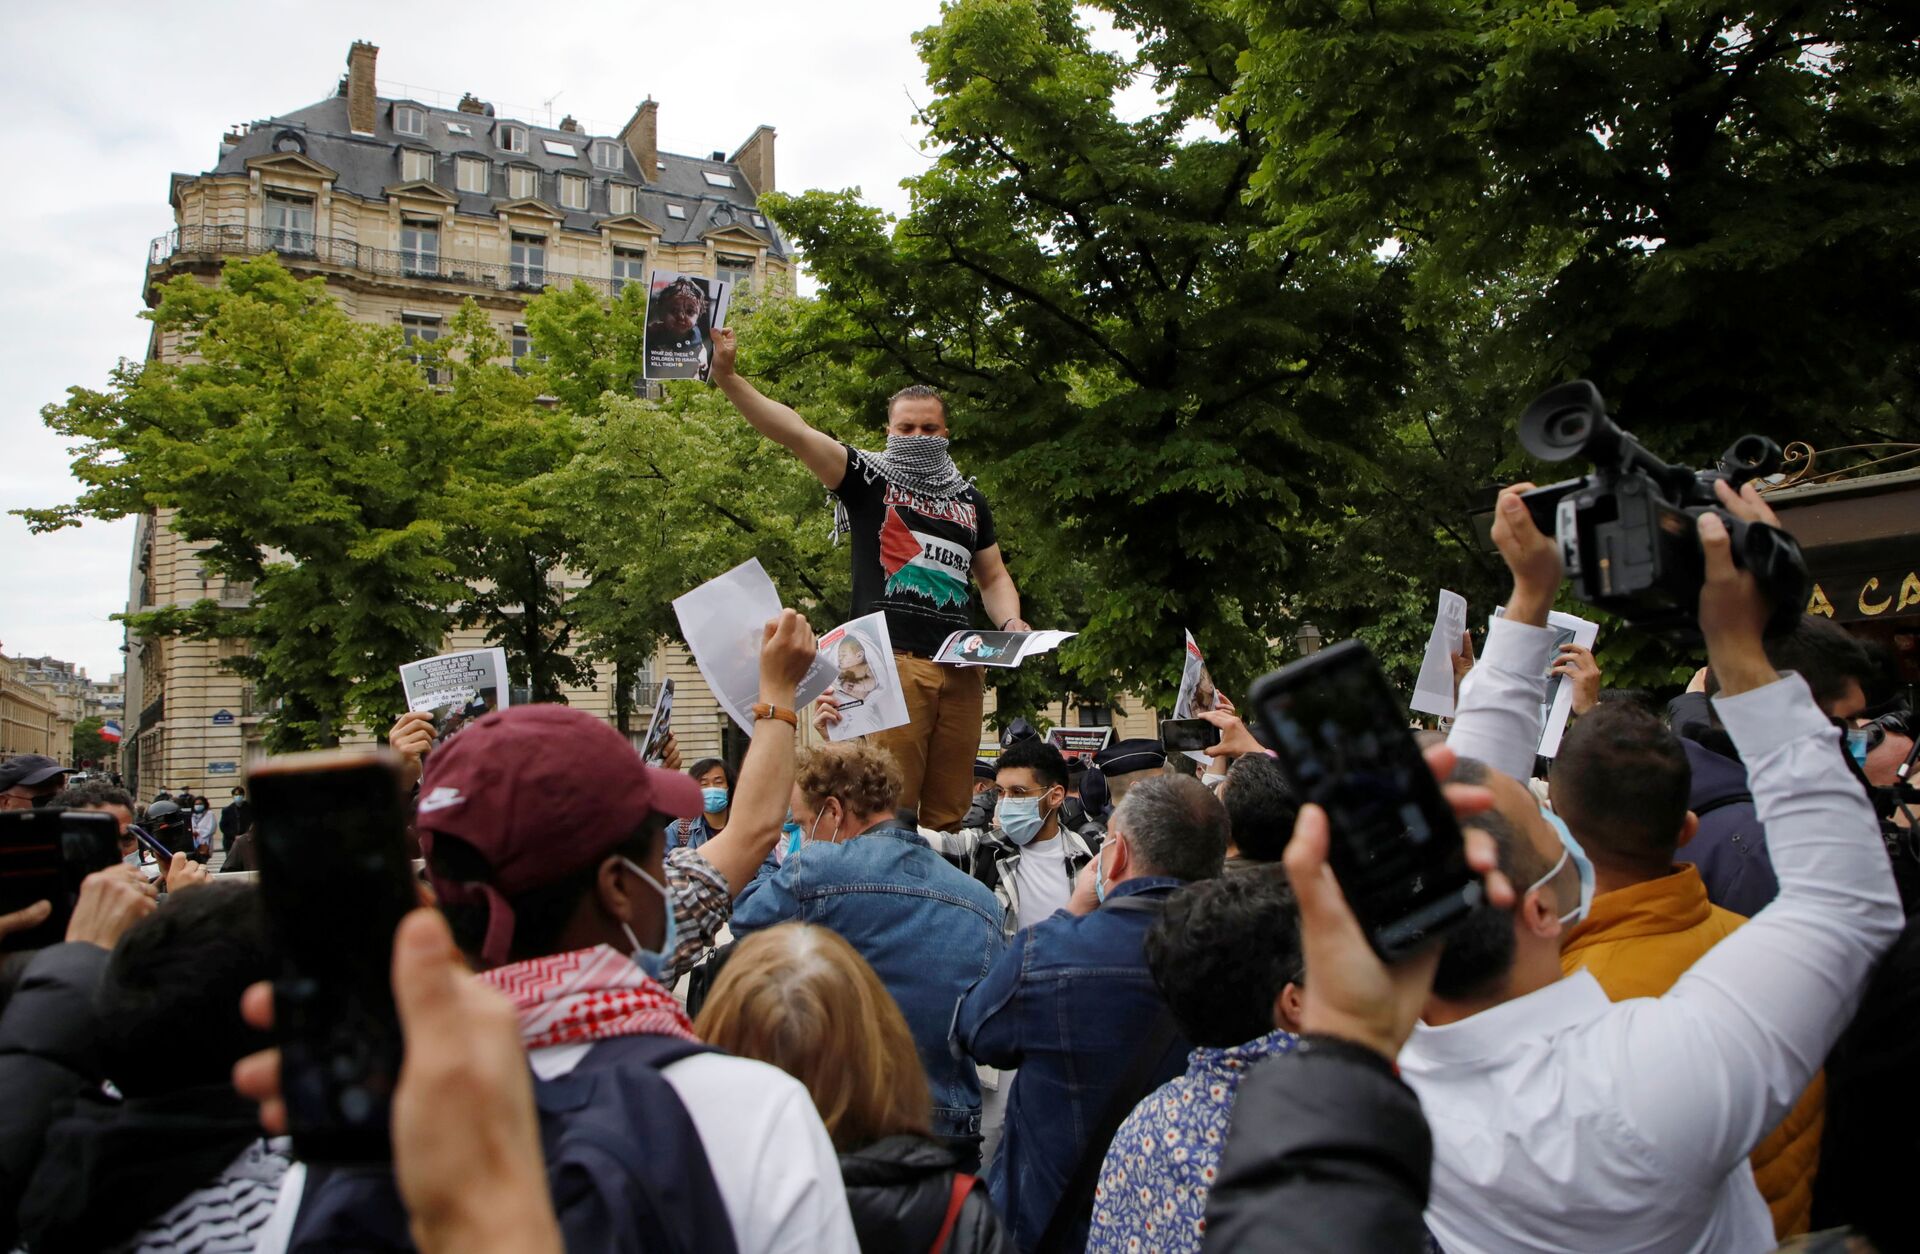 French Court Upholds Police Ban on Pro-Palestinian Protest Planned in Paris for Saturday - Report - Sputnik International, 1920, 14.05.2021